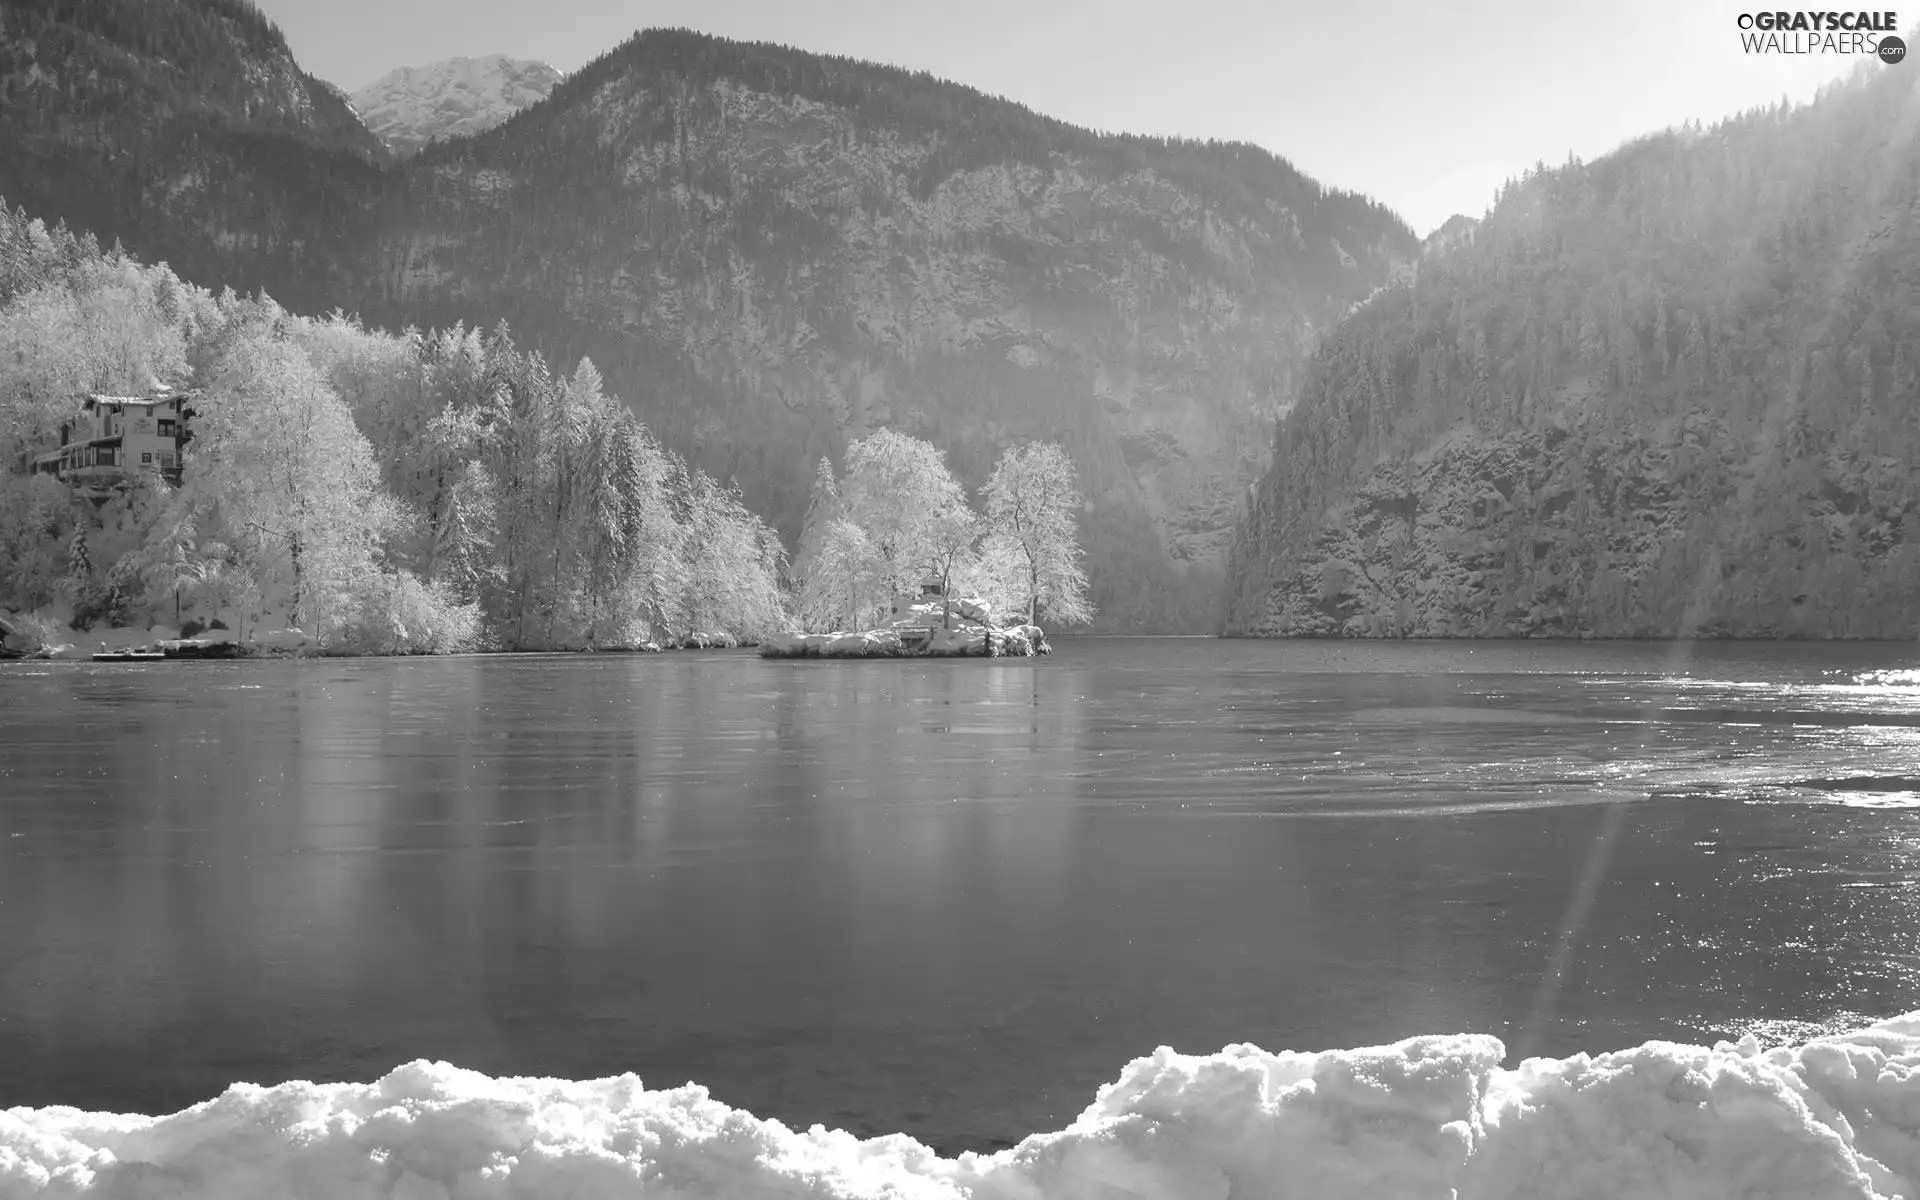 viewes, winter, lake, trees, Mountains